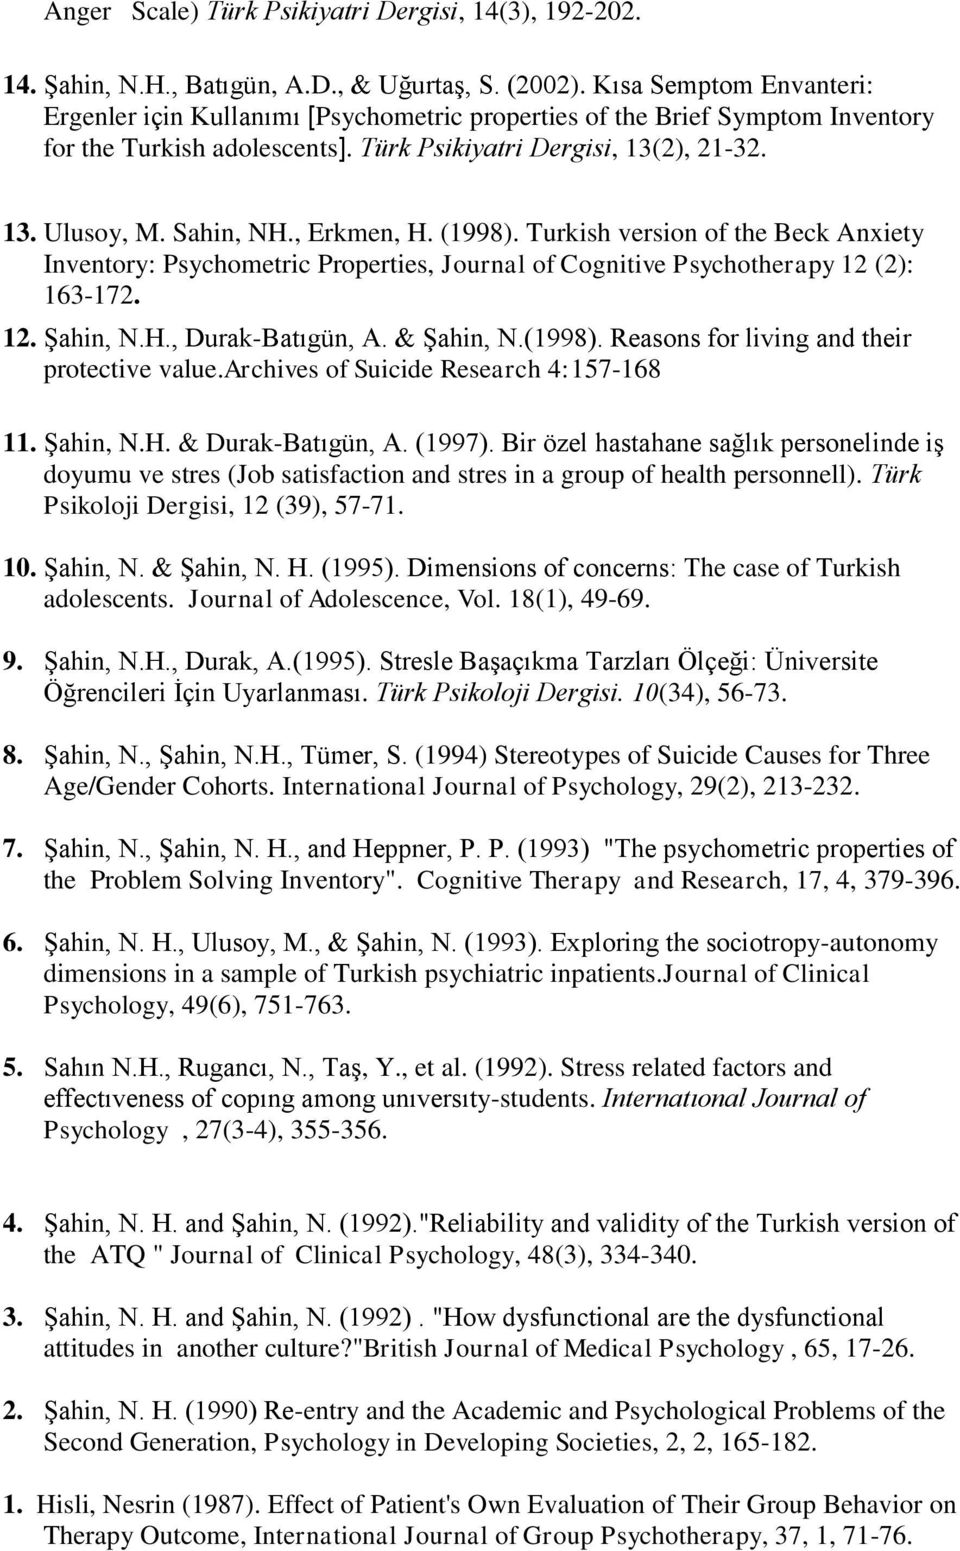 , Erkmen, H. (1998). Turkish version of the Beck Anxiety Inventory: Psychometric Properties, Journal of Cognitive Psychotherapy 12 (2): 163-172. 12. Şahin, N.H., Durak-Batıgün, A. & Şahin, N.(1998). Reasons for living and their protective value.